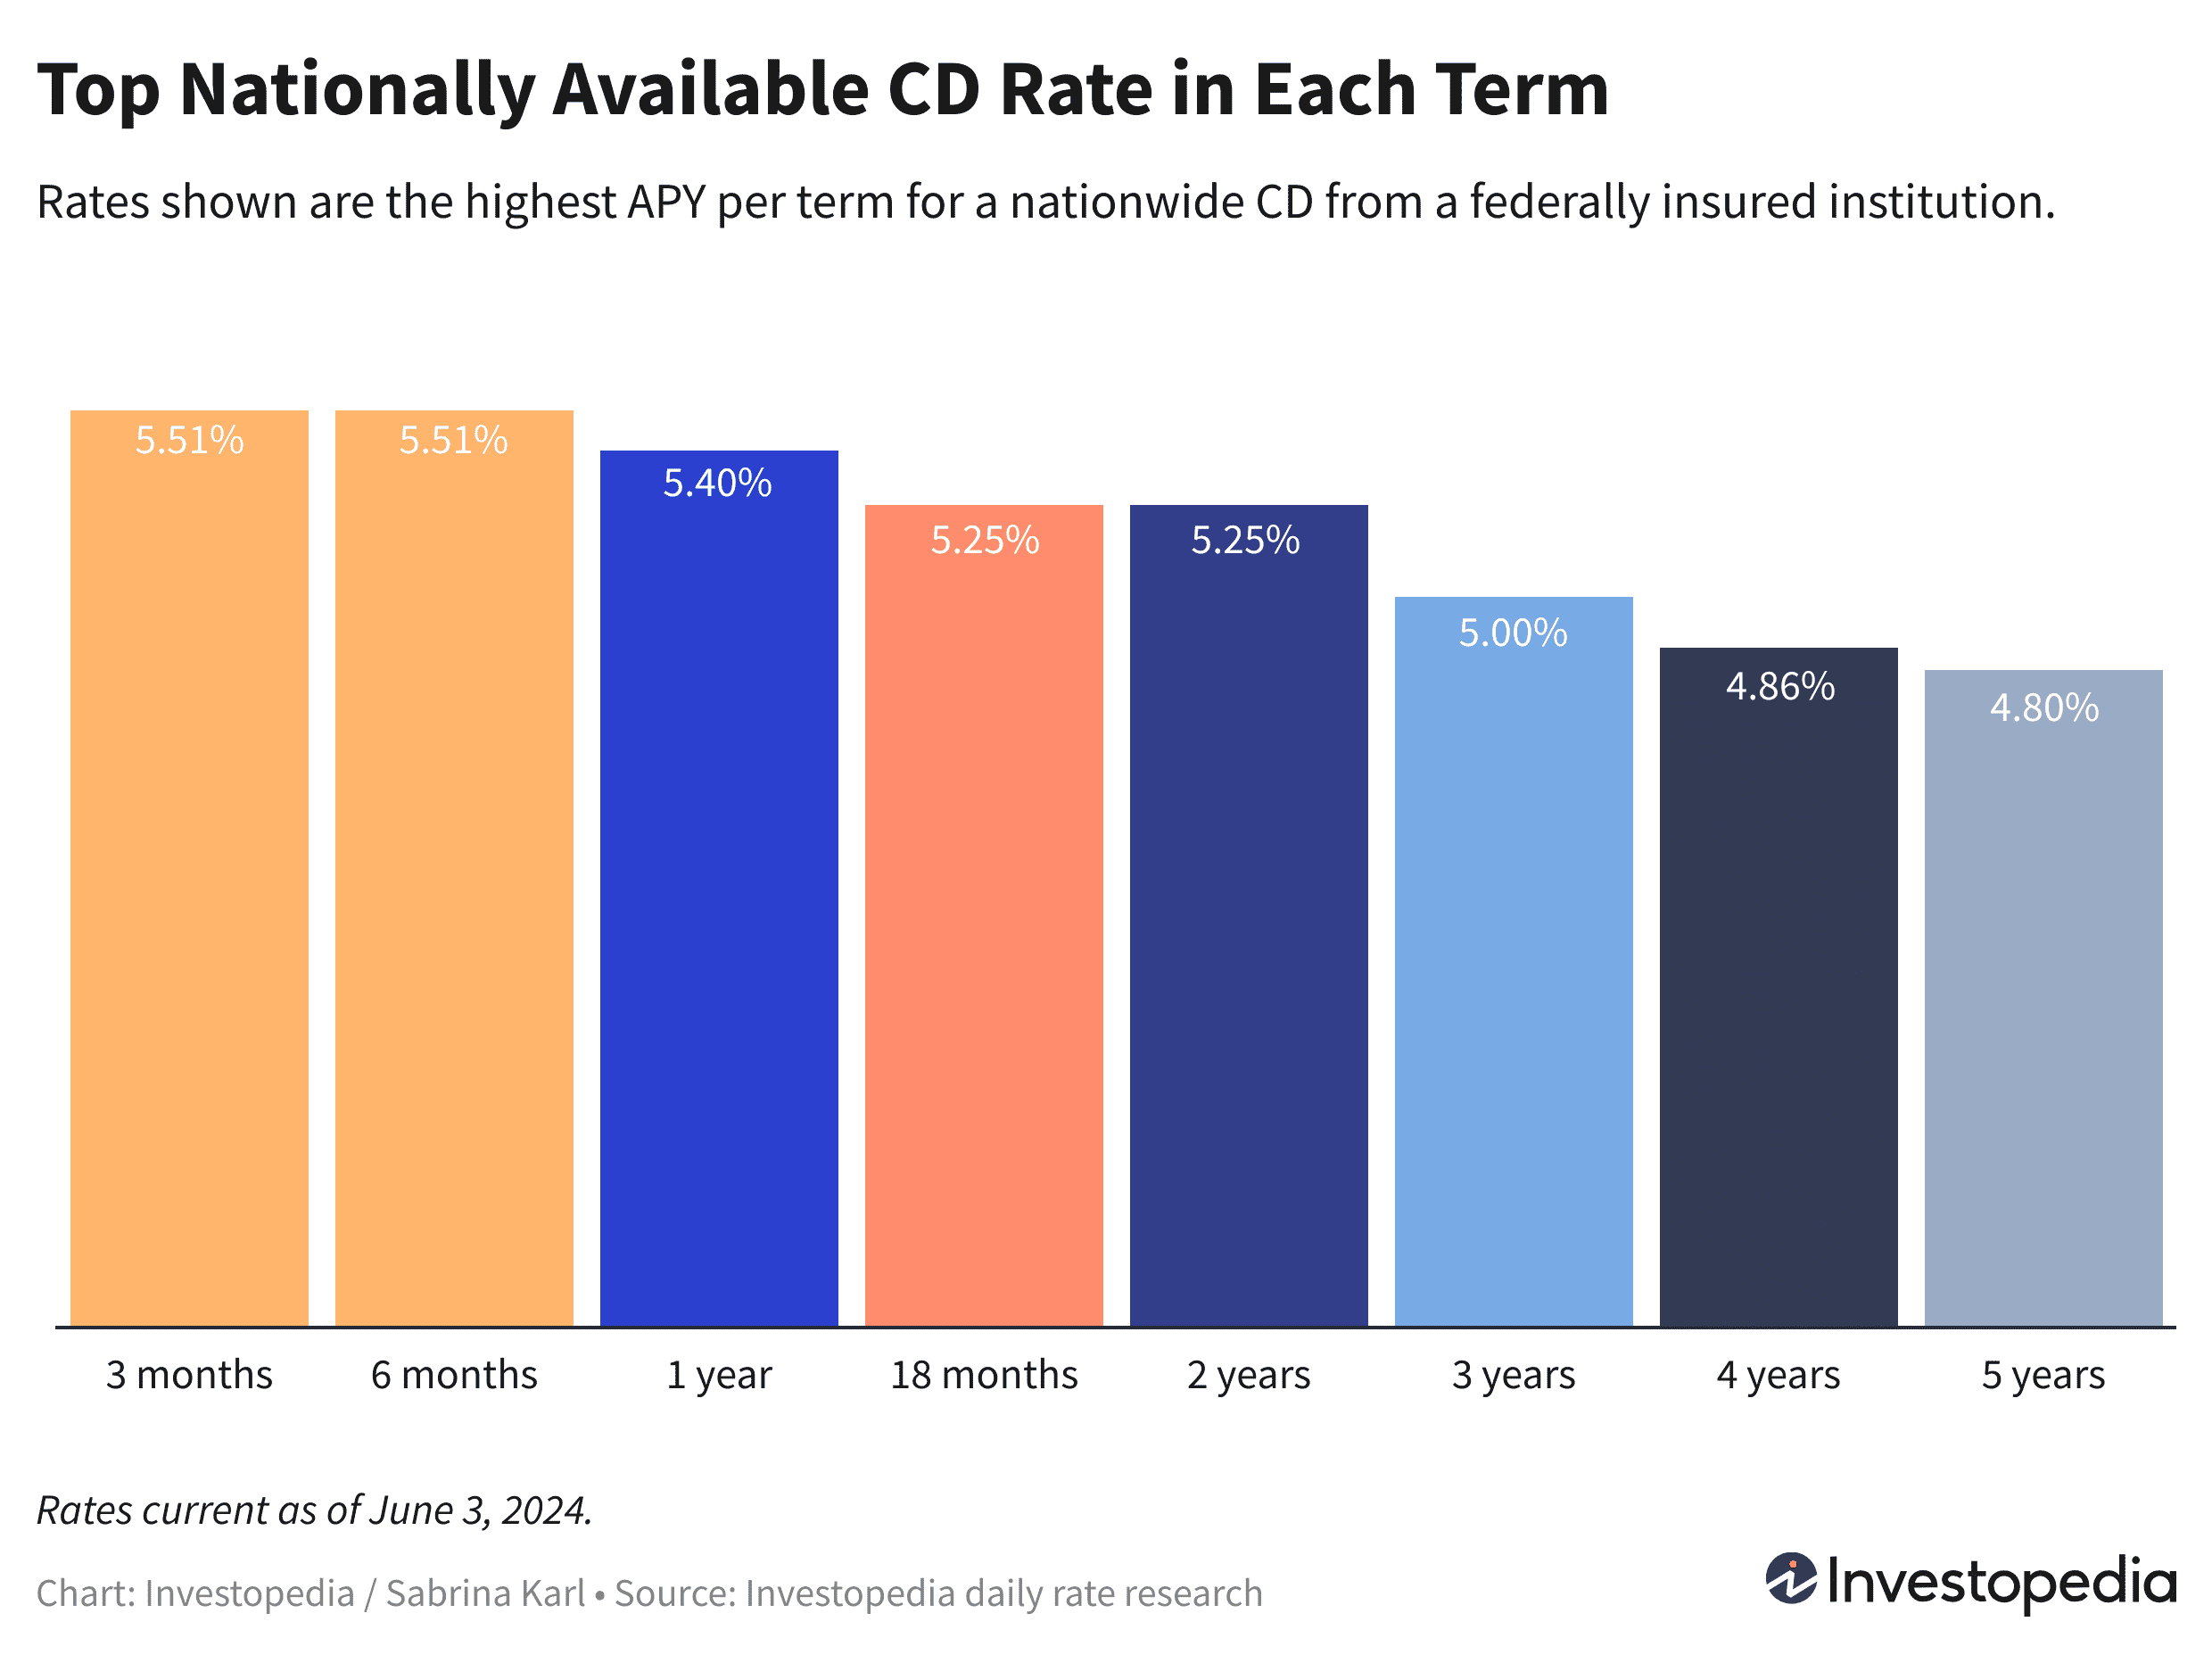 Top nationwide CD rate in each term, ranging from 4.80% to 5.51%, current as of June 3, 2024.